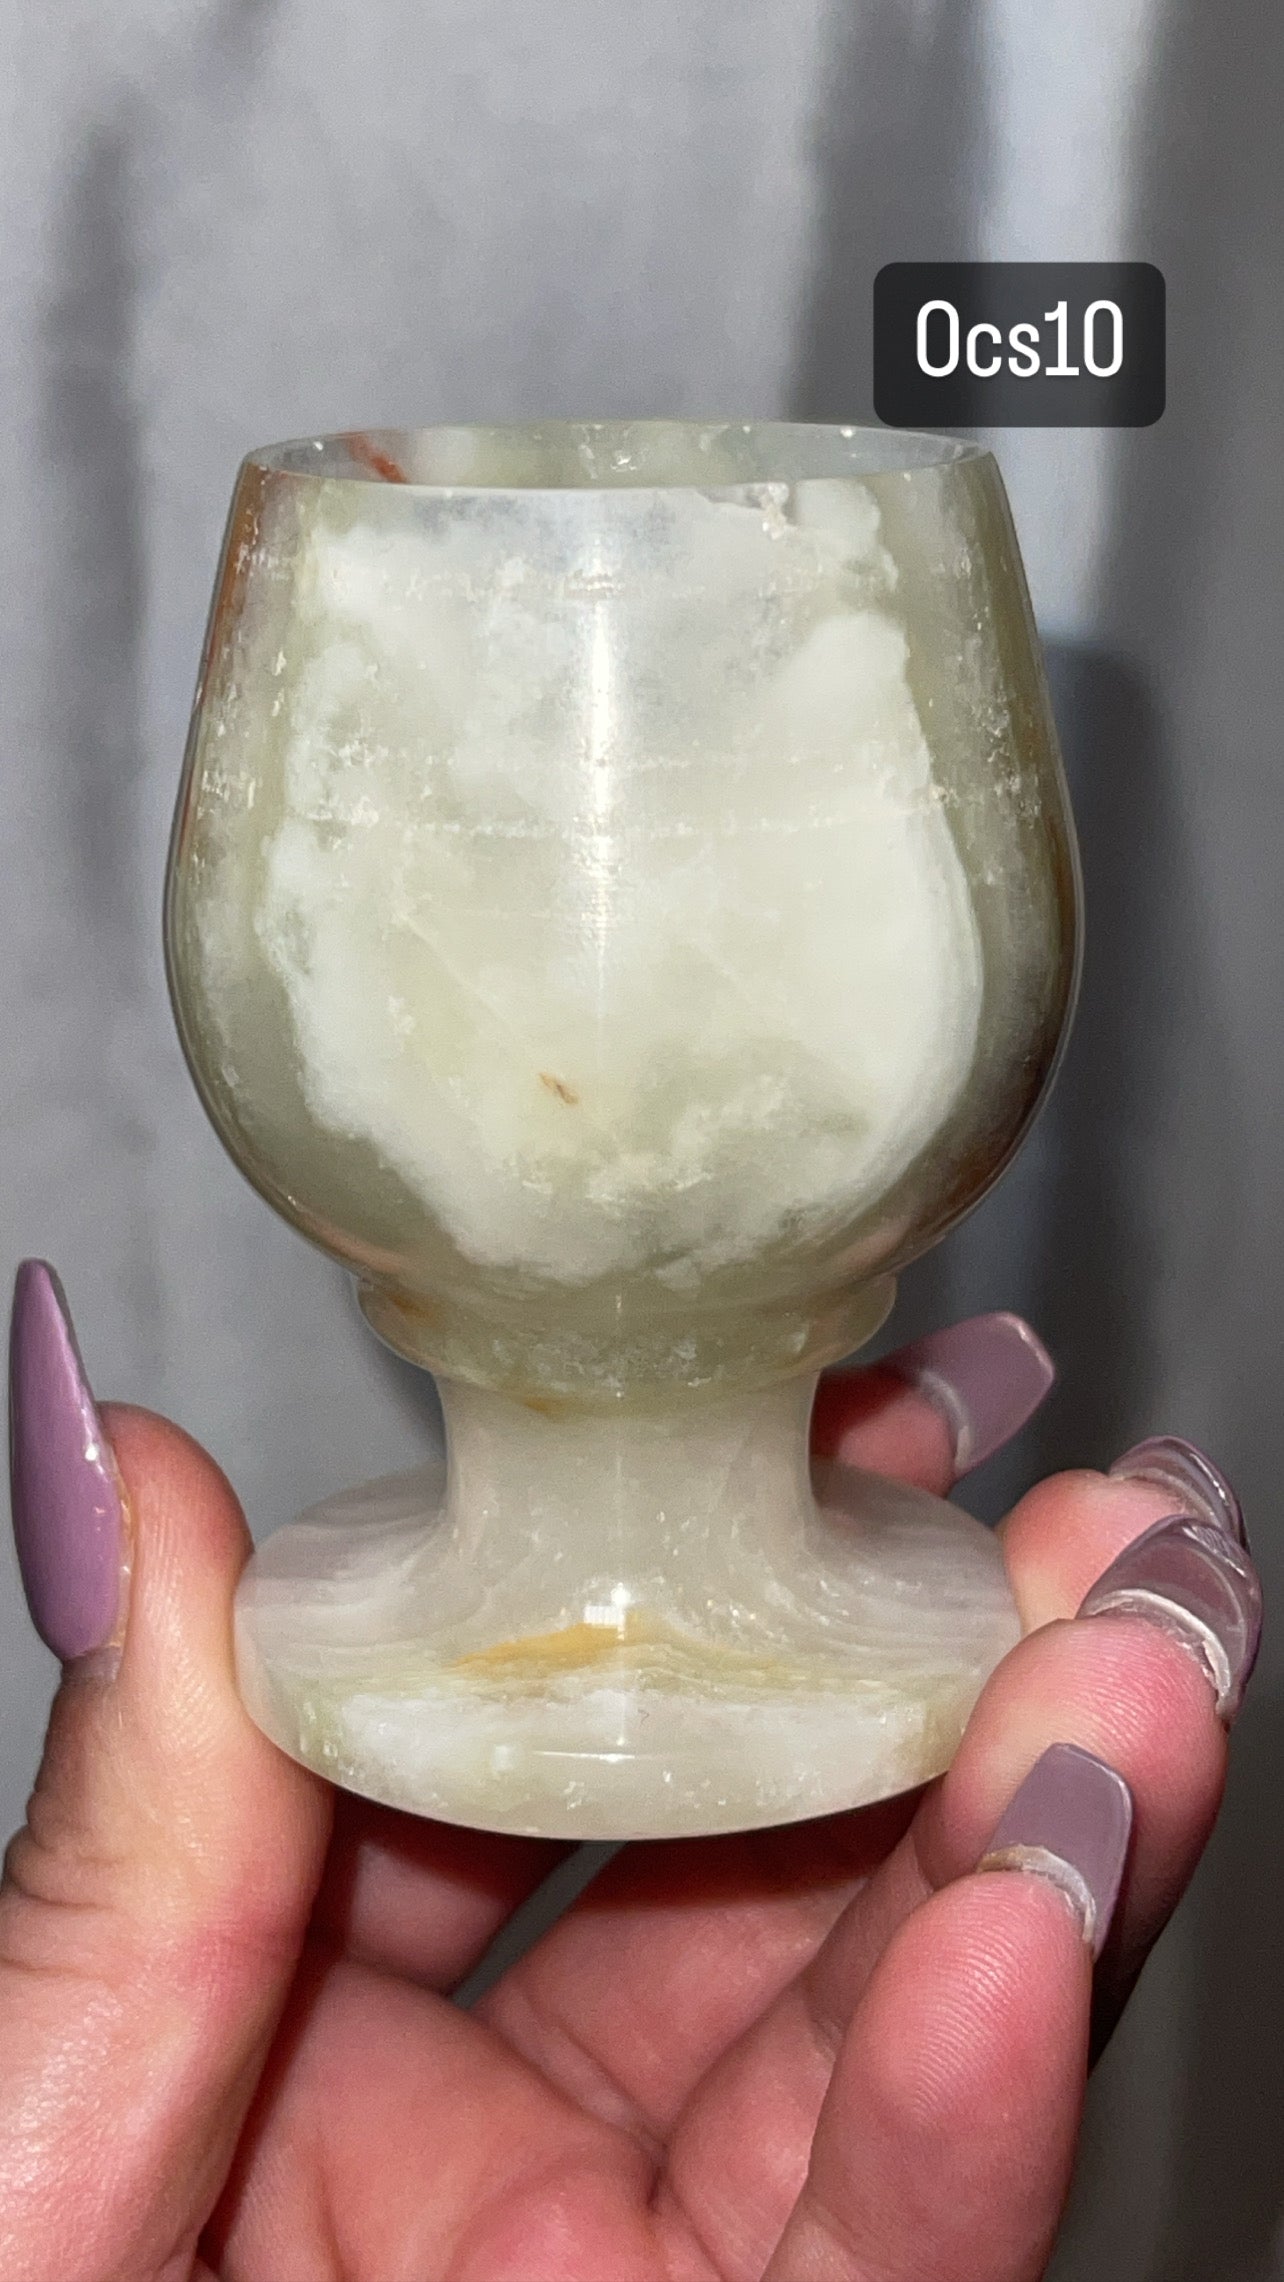 Green Banded Onyx Cup